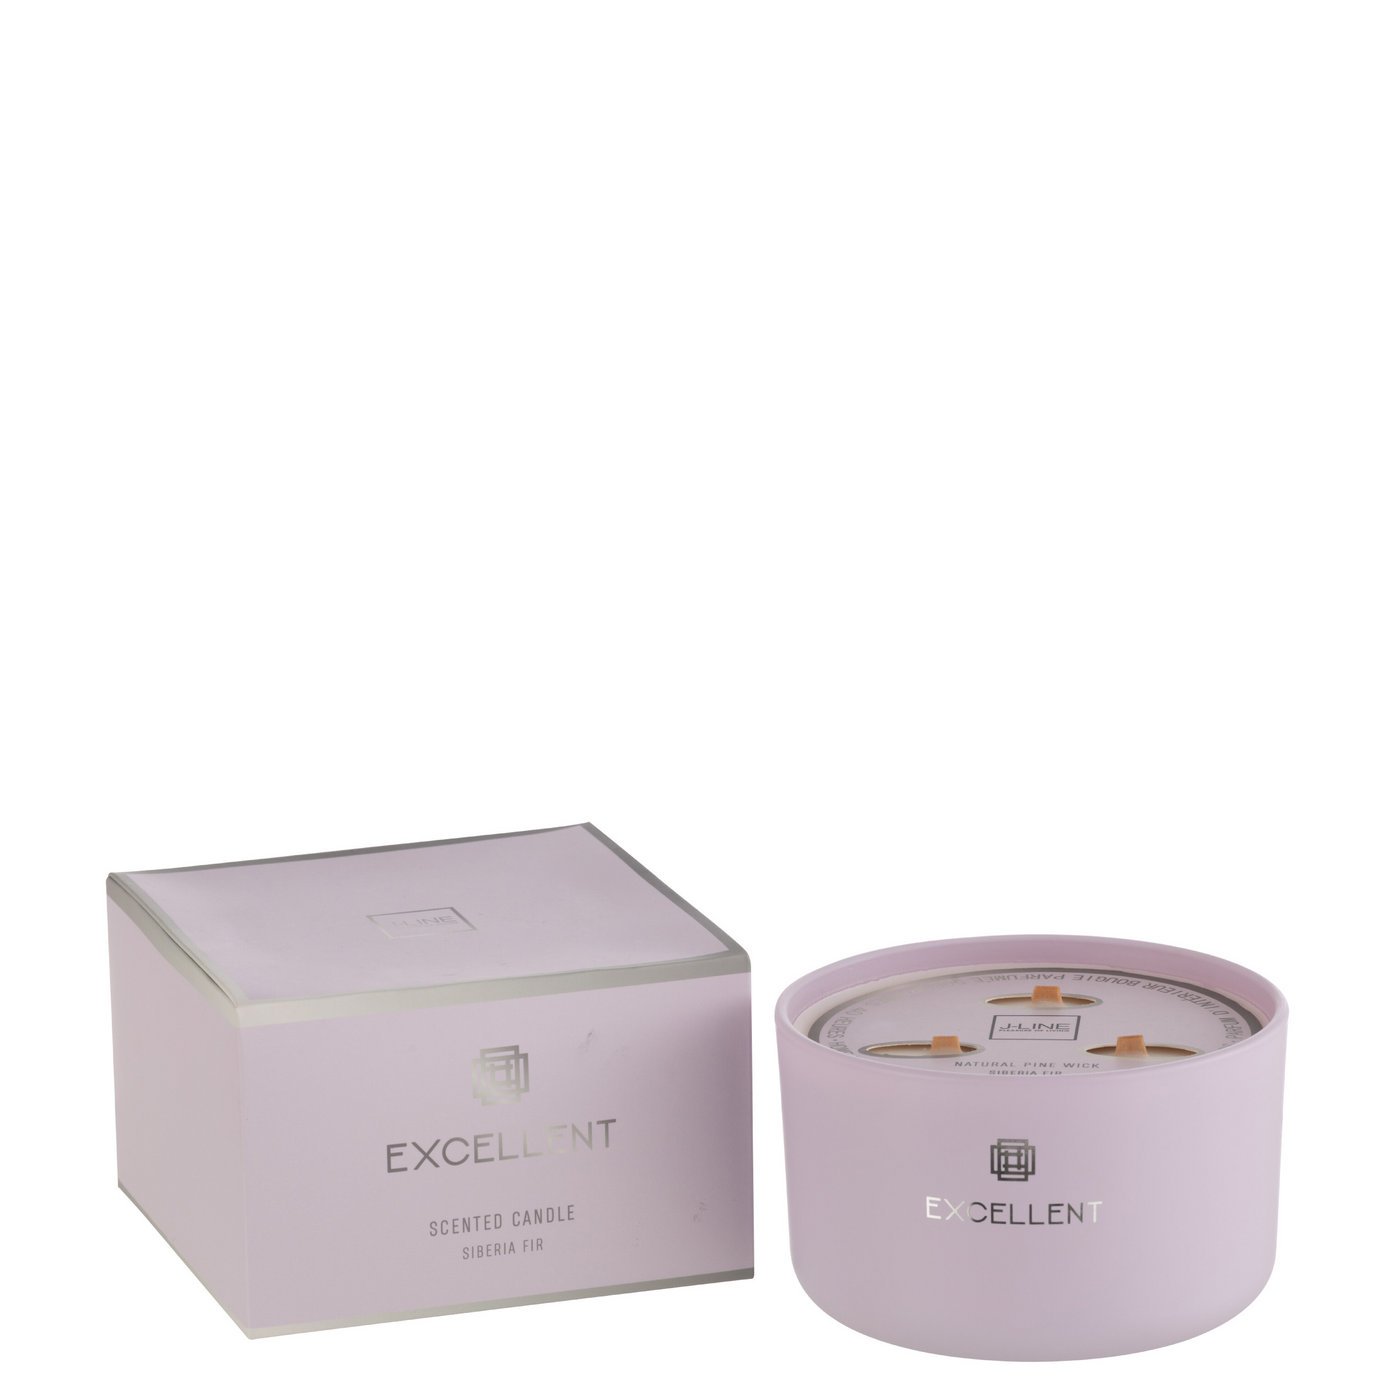 SCENTED CANDLE EXCELLENT GLASS LILA LARGE-50U